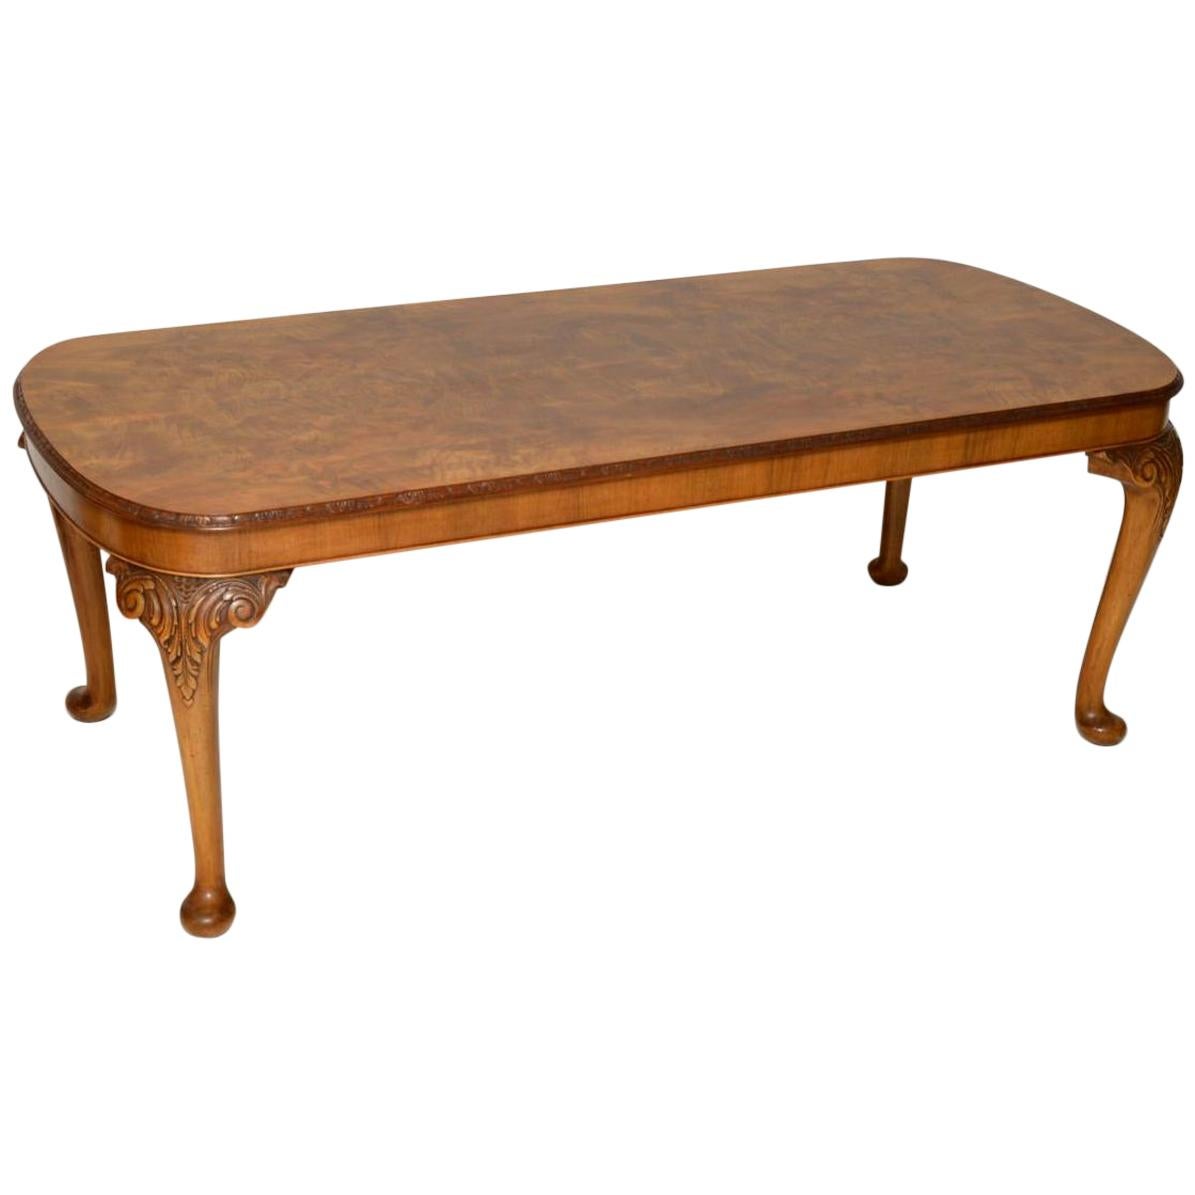 Antique Queen Anne Style Walnut Dining Table